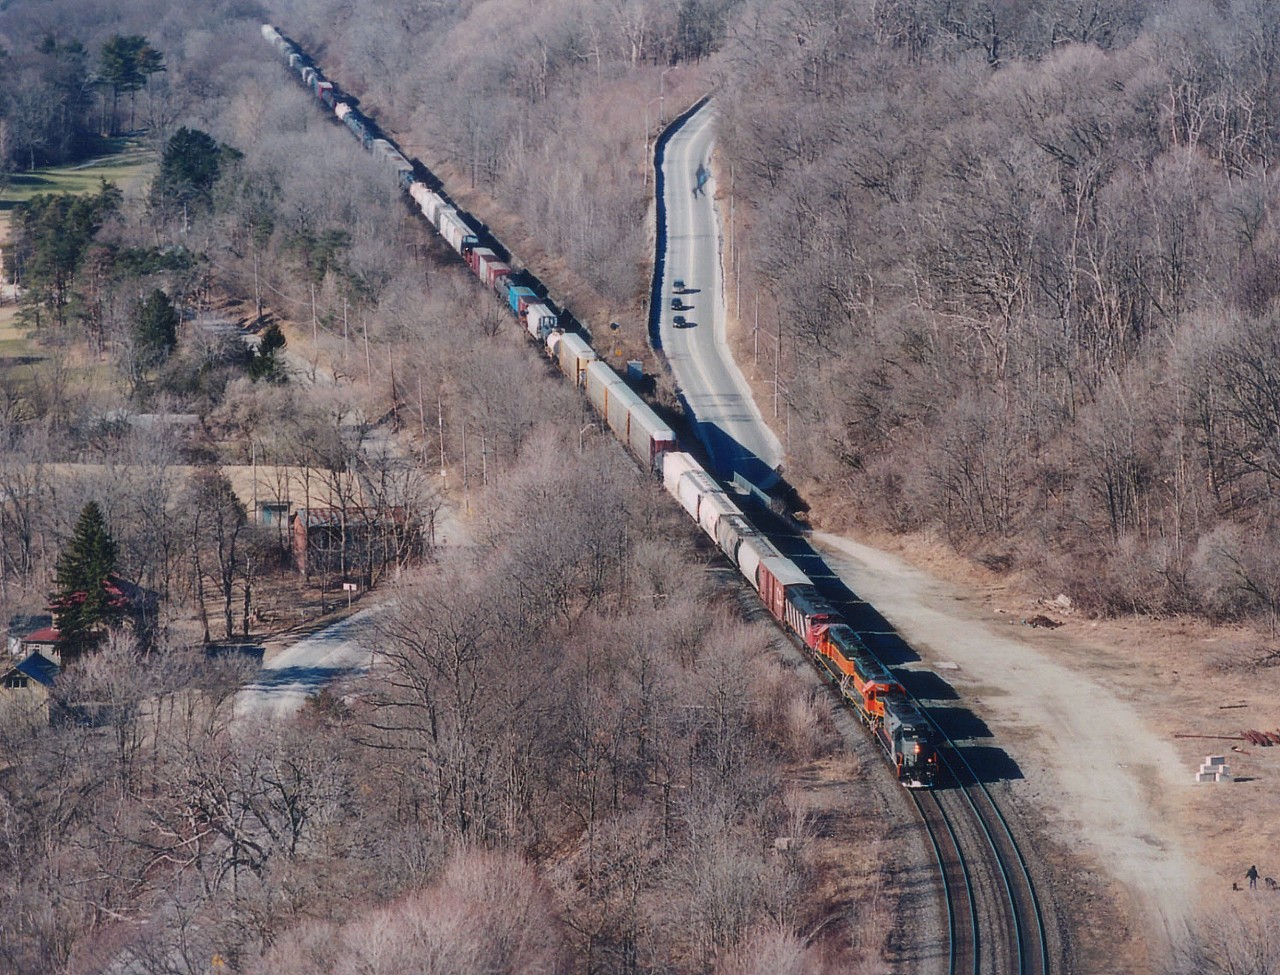 Power combinations on CN in the middle 2000s were entertaining, to say the least. Here is CN #396 eastbound past the site of the old Dundas station with WC 6926, BNSF 7885, 8018 and CN 5526 up front. The CTG lists the leader as "SD40 upgraded to SD40-3 in 1997/98. Lettered GEC Alsthom (owned by Connell Finance) relettered Wisconsin Central beginning in July 2003." The SD40-2 BNSFs are former BN, same numbers. A CN SD60F trails. For those interested, this image was shot with Medium format film, Fuji 800 ISO. There are actually still a few film junkies out there in this digital age. :o) A good hike to the edge of Dundas Peak provides this tremendous view out over the valley.